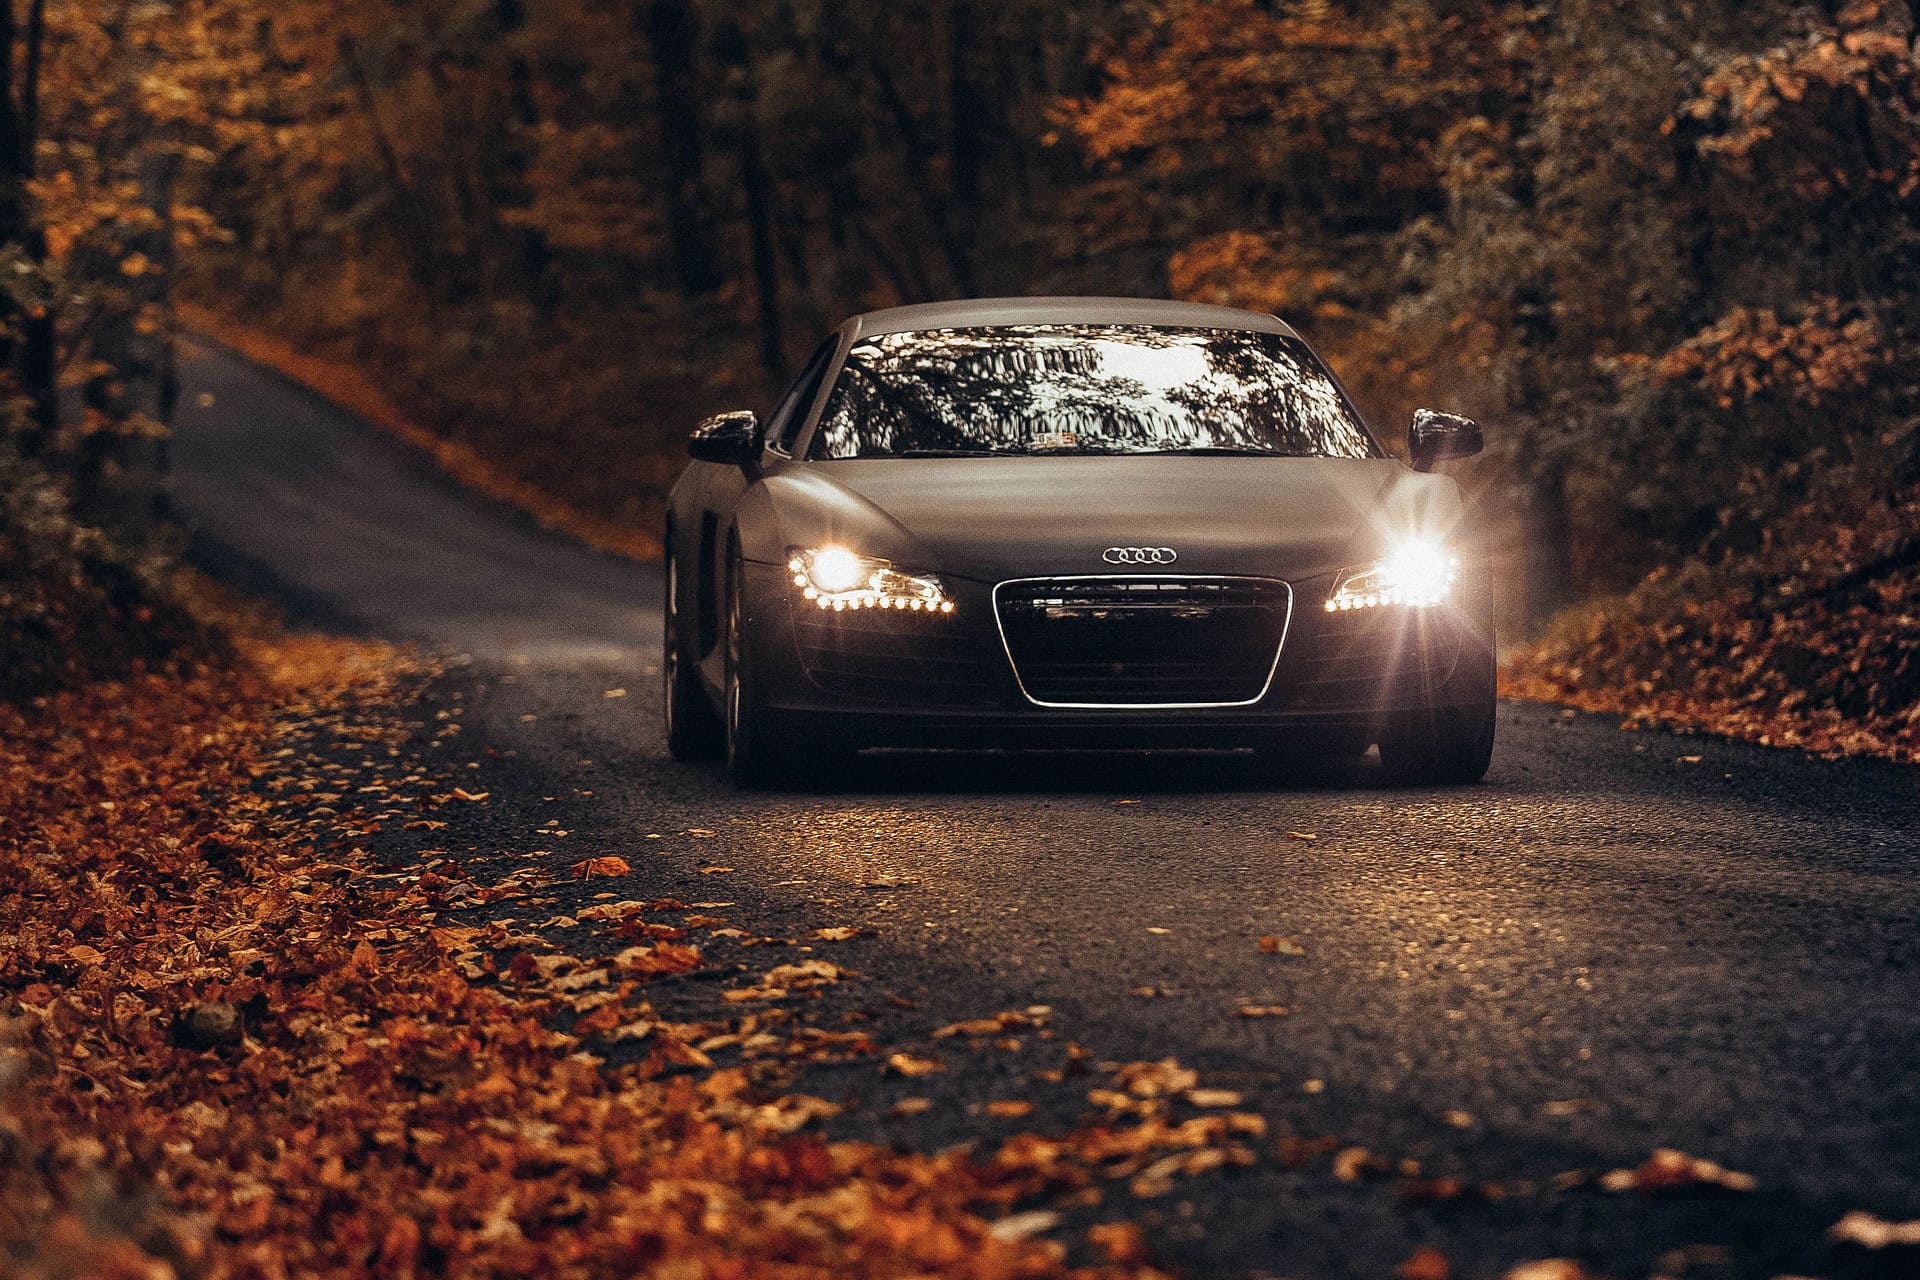 Audi driving on a road in the autumn